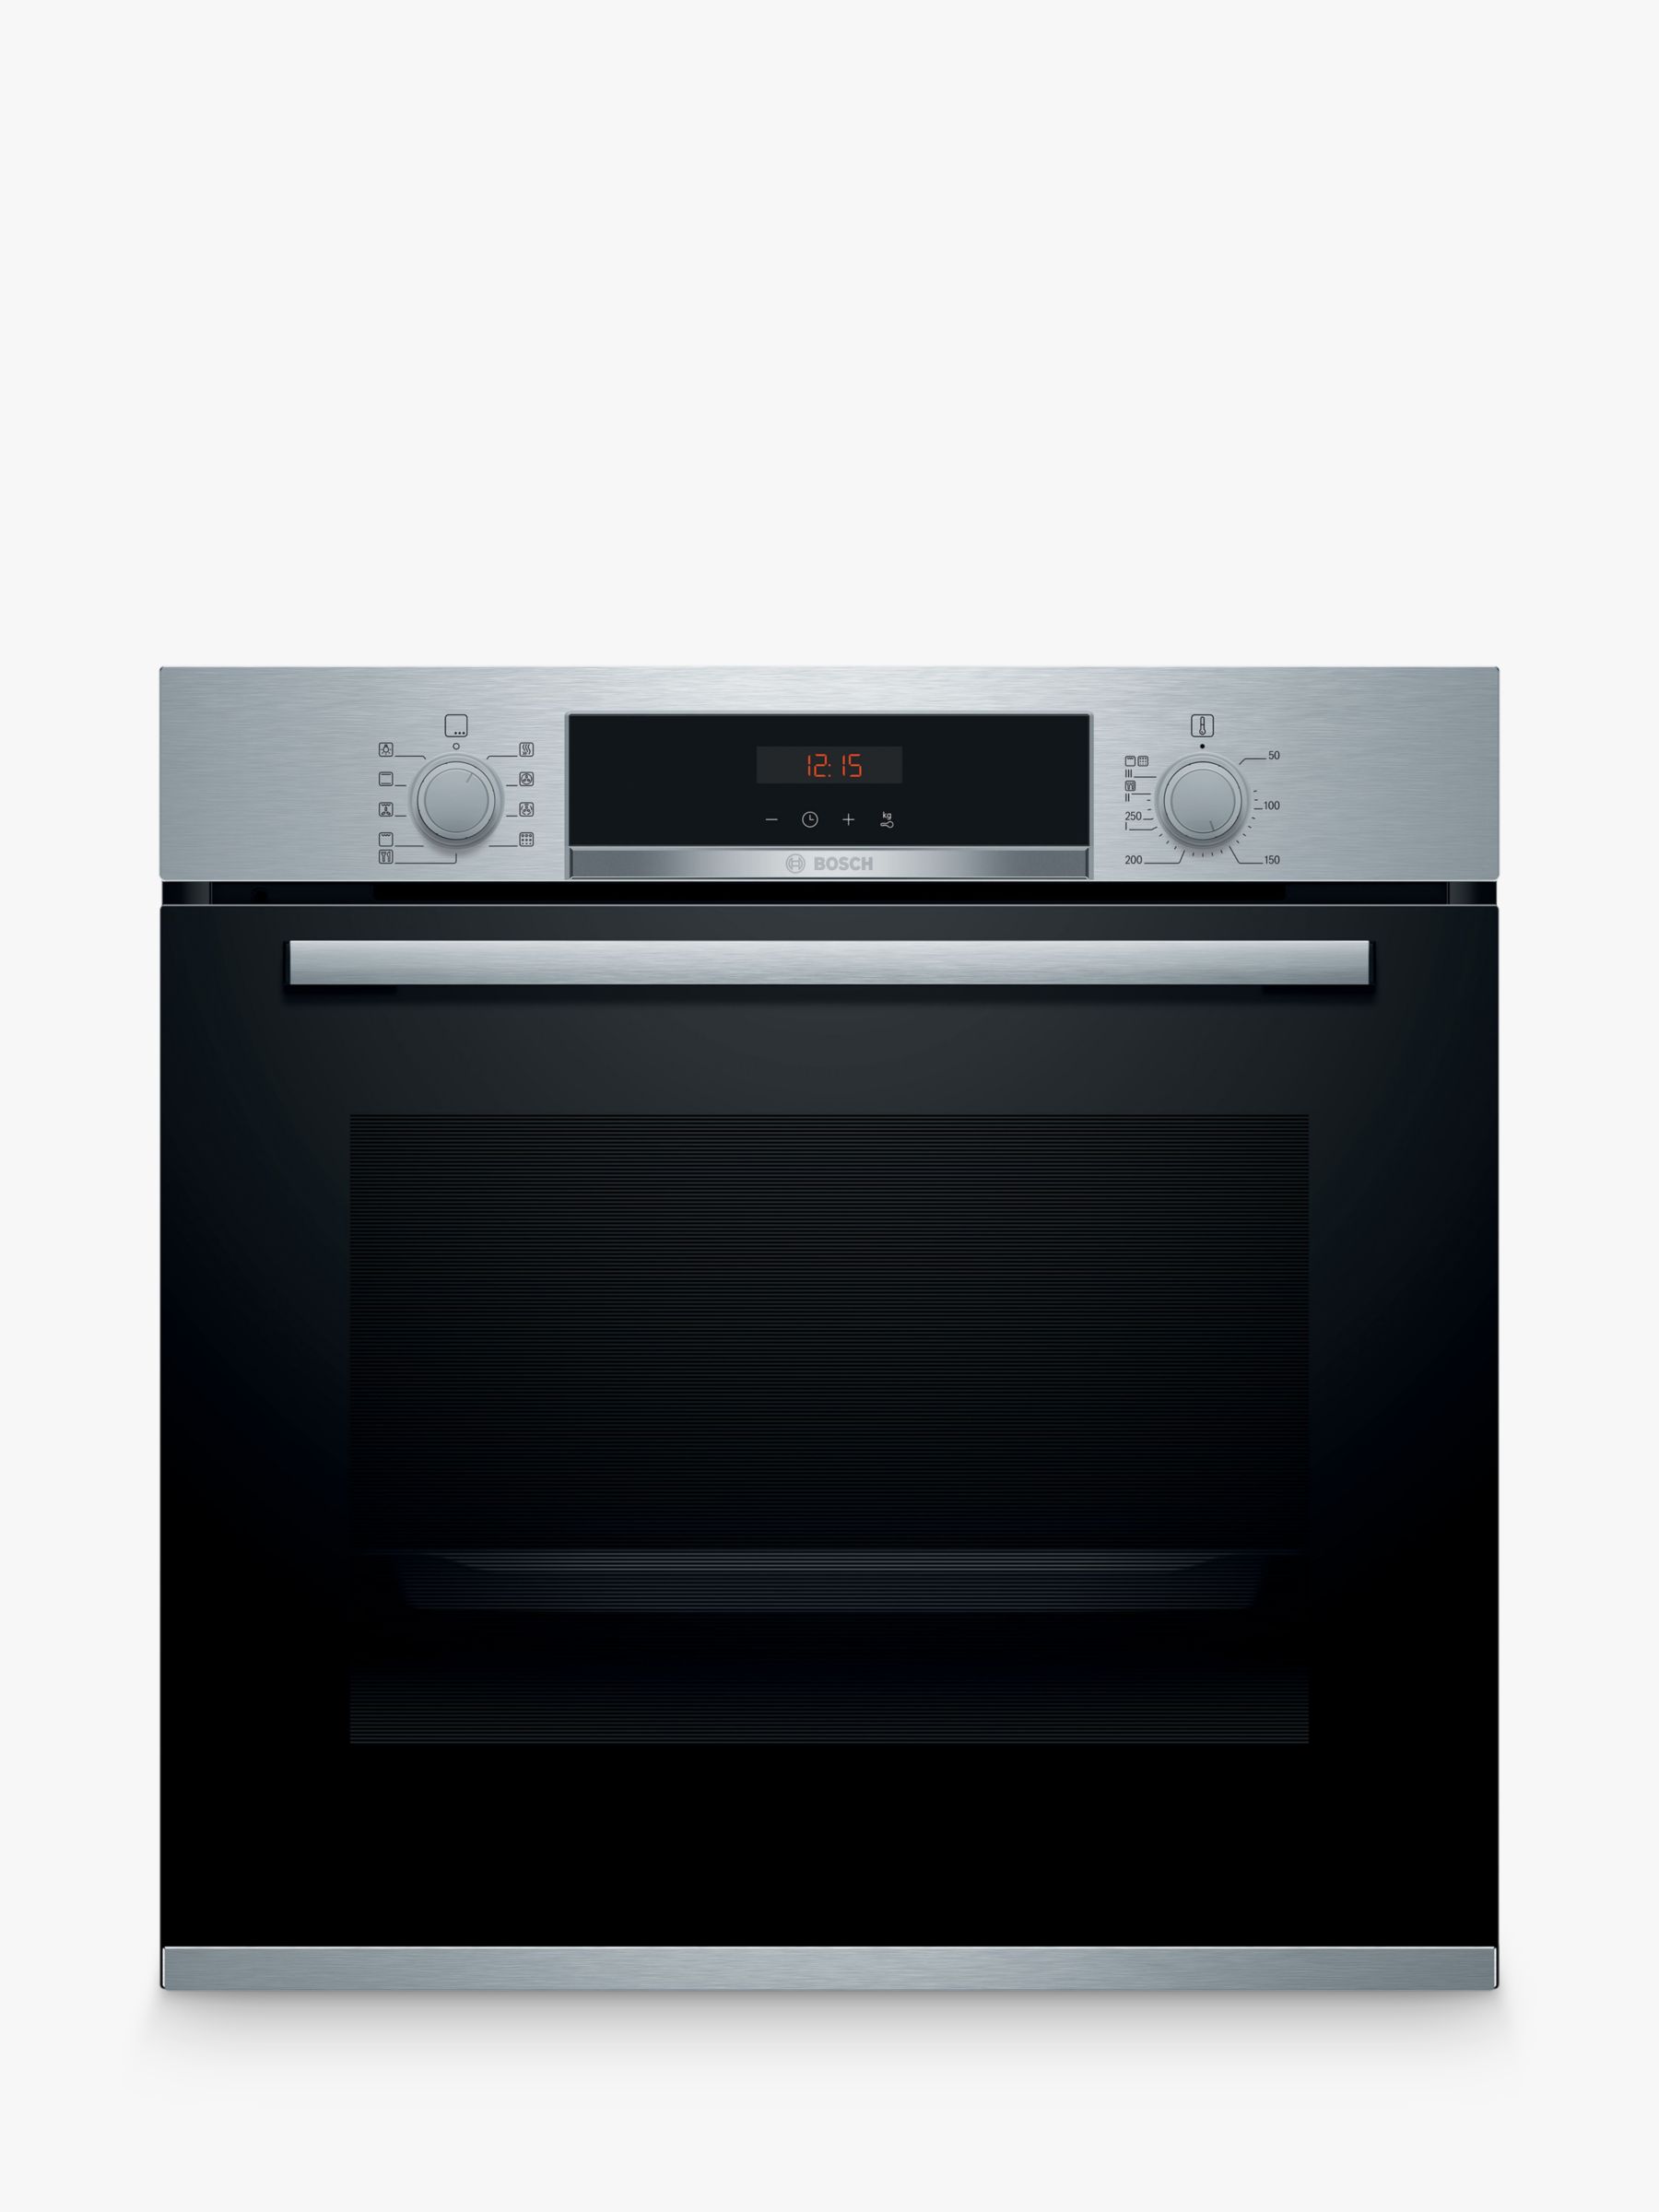 Series HBS573BS0B Built In Self Cleaning Single Oven, Stainless